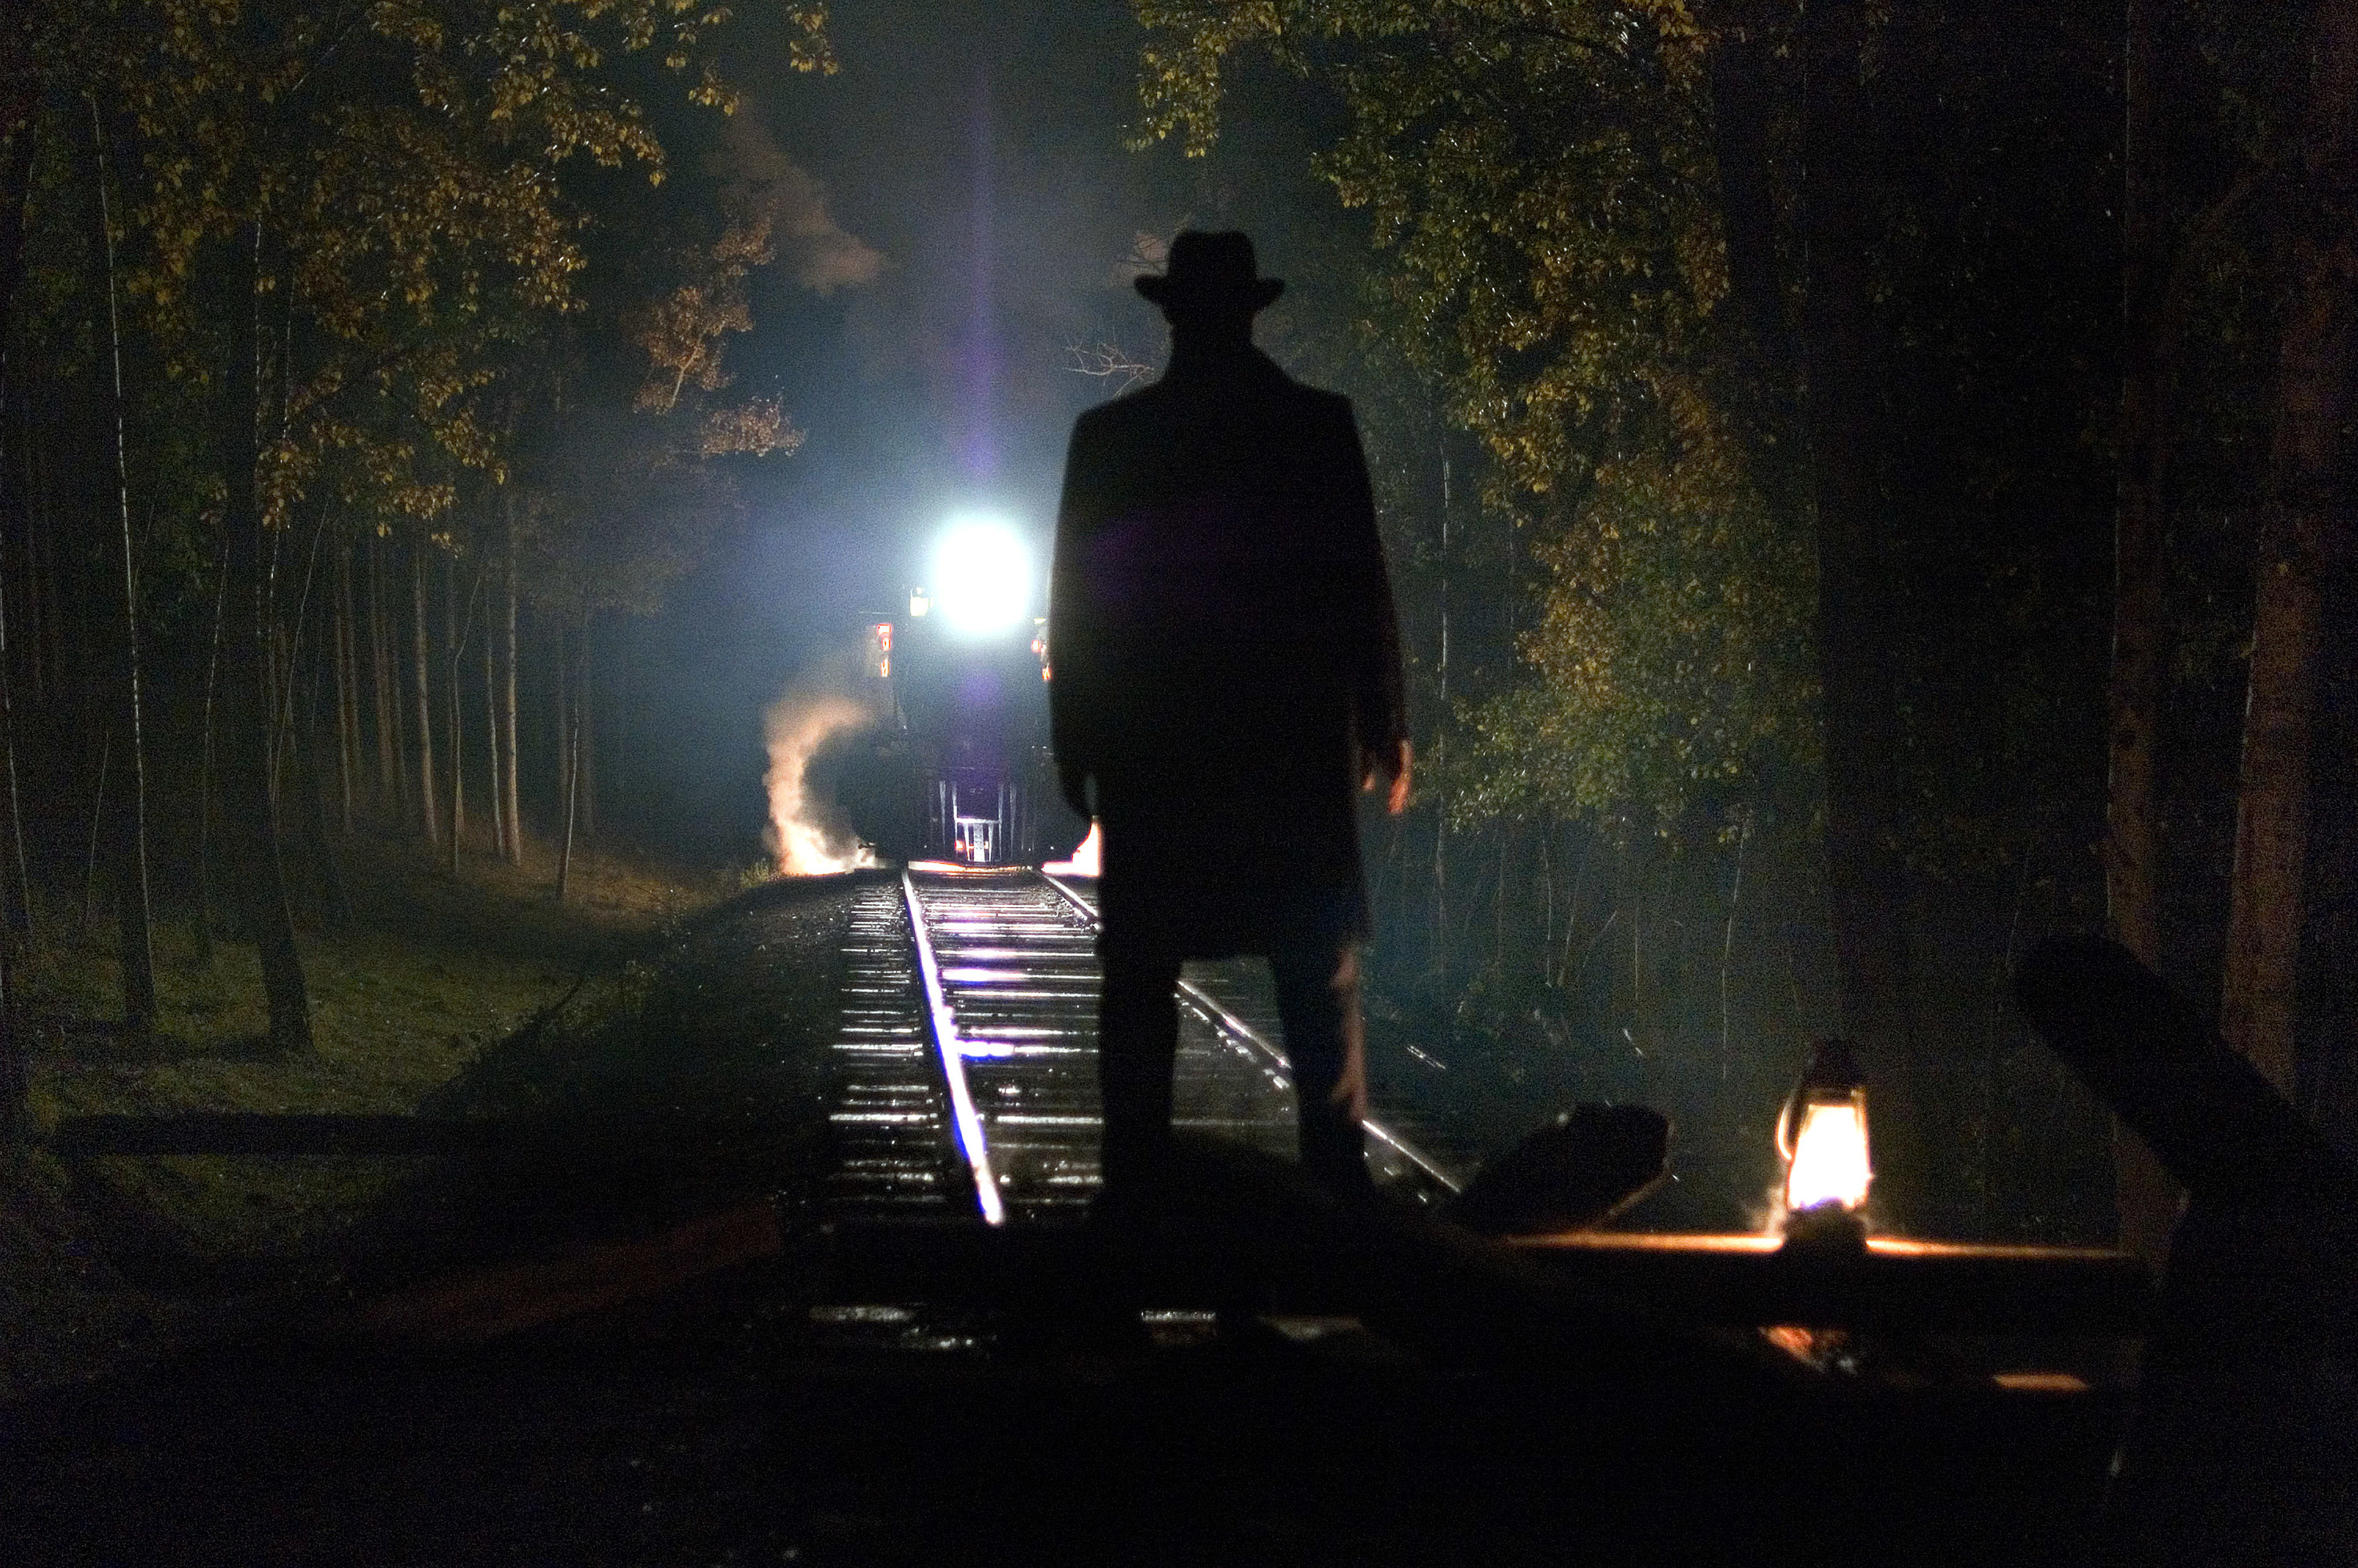 the backside of a man wearing a hat and standing in the middle of train tracks in the dark while a train moves toward him